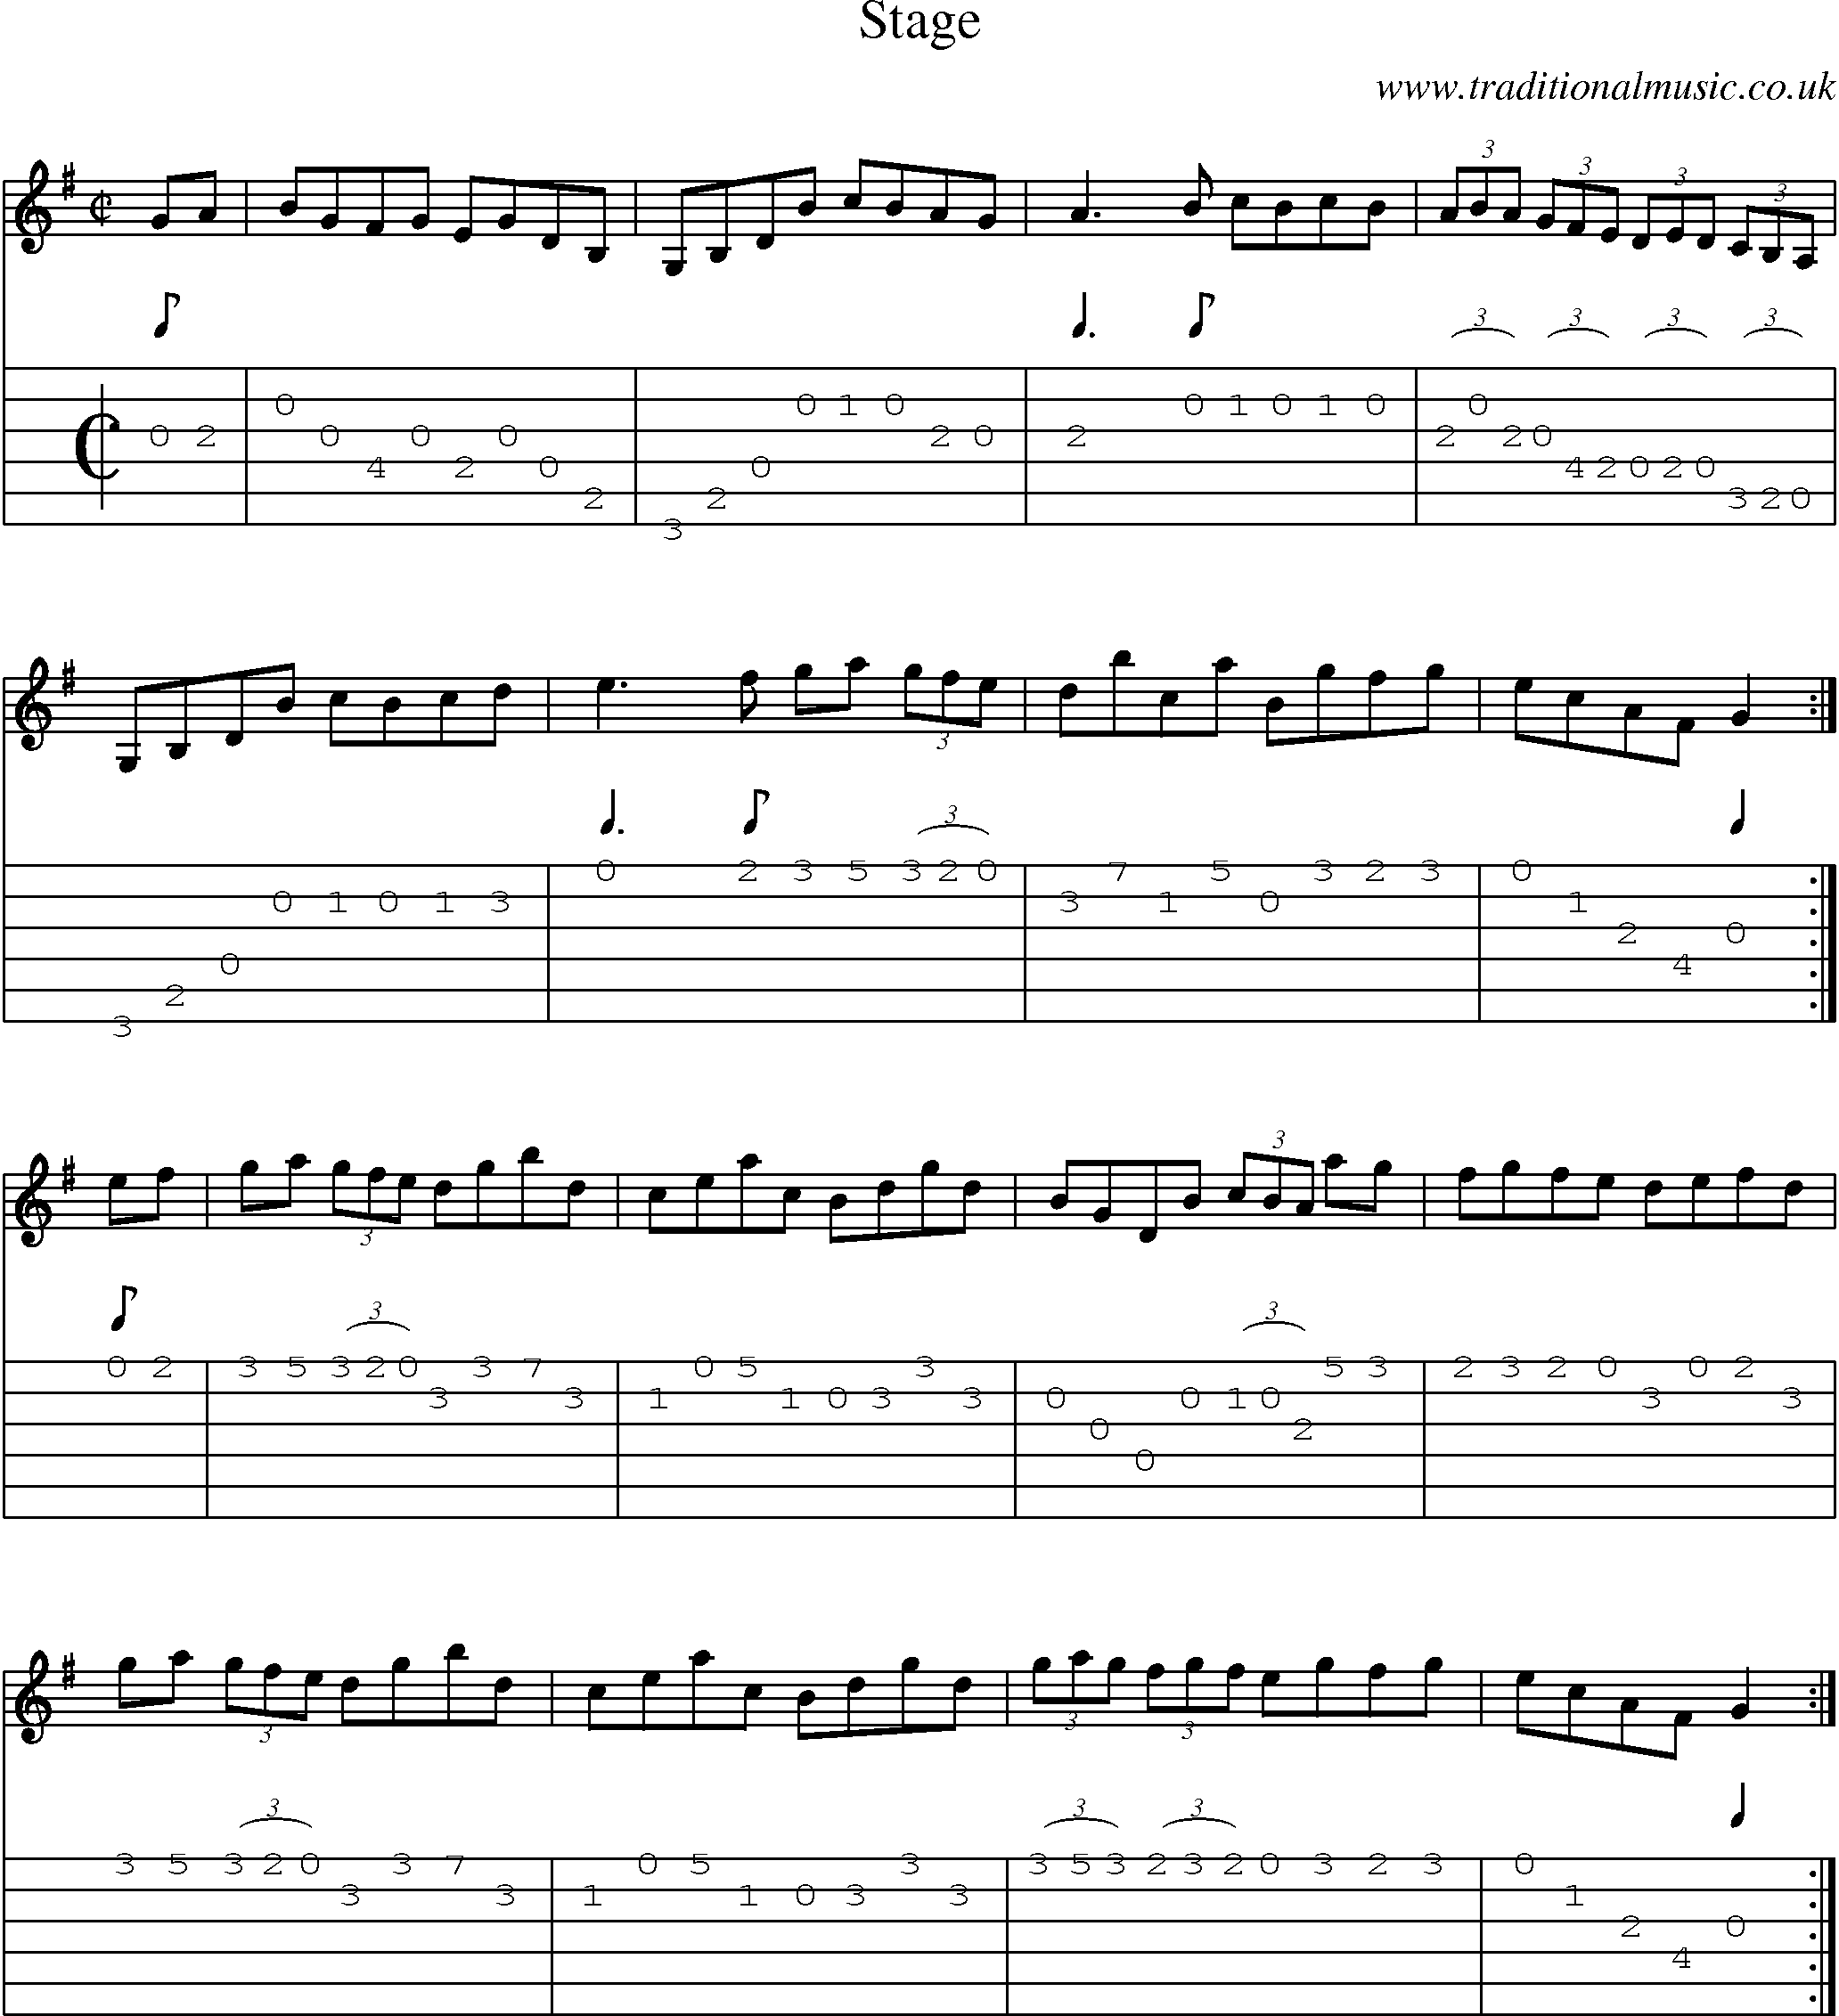 Music Score and Guitar Tabs for Stage